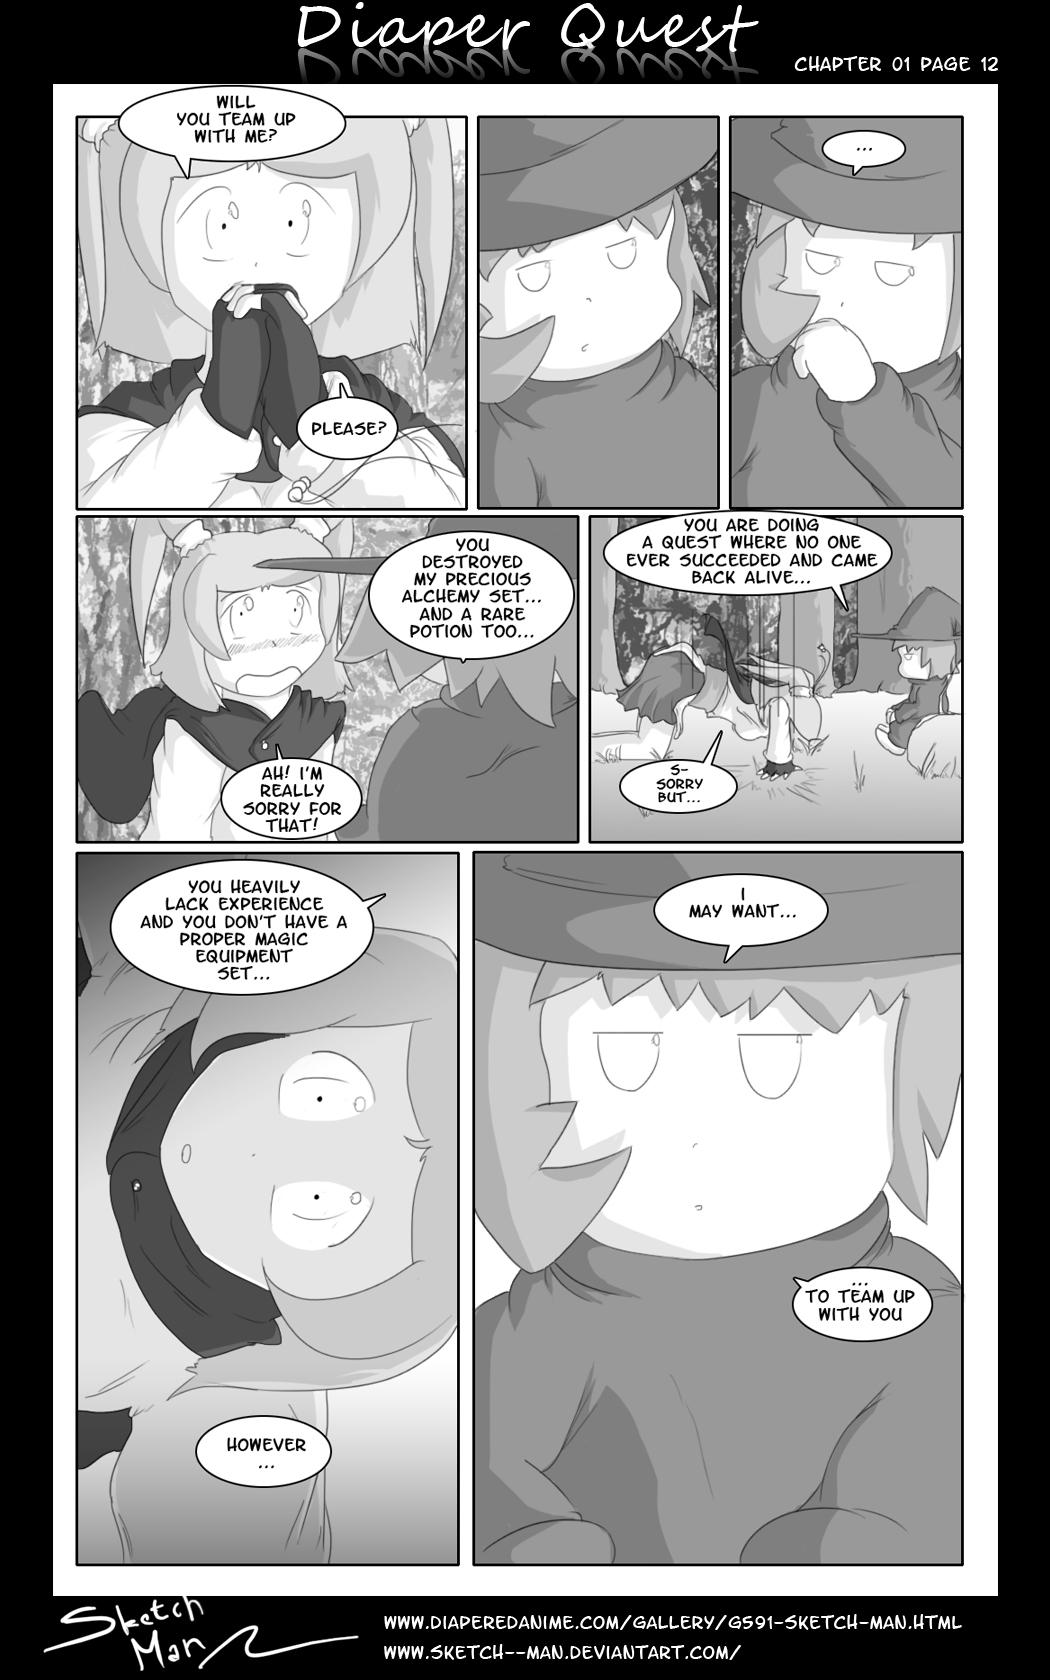 Doublepenetration Sketch Man's Diaper Quest Complete Handjobs - Page 12